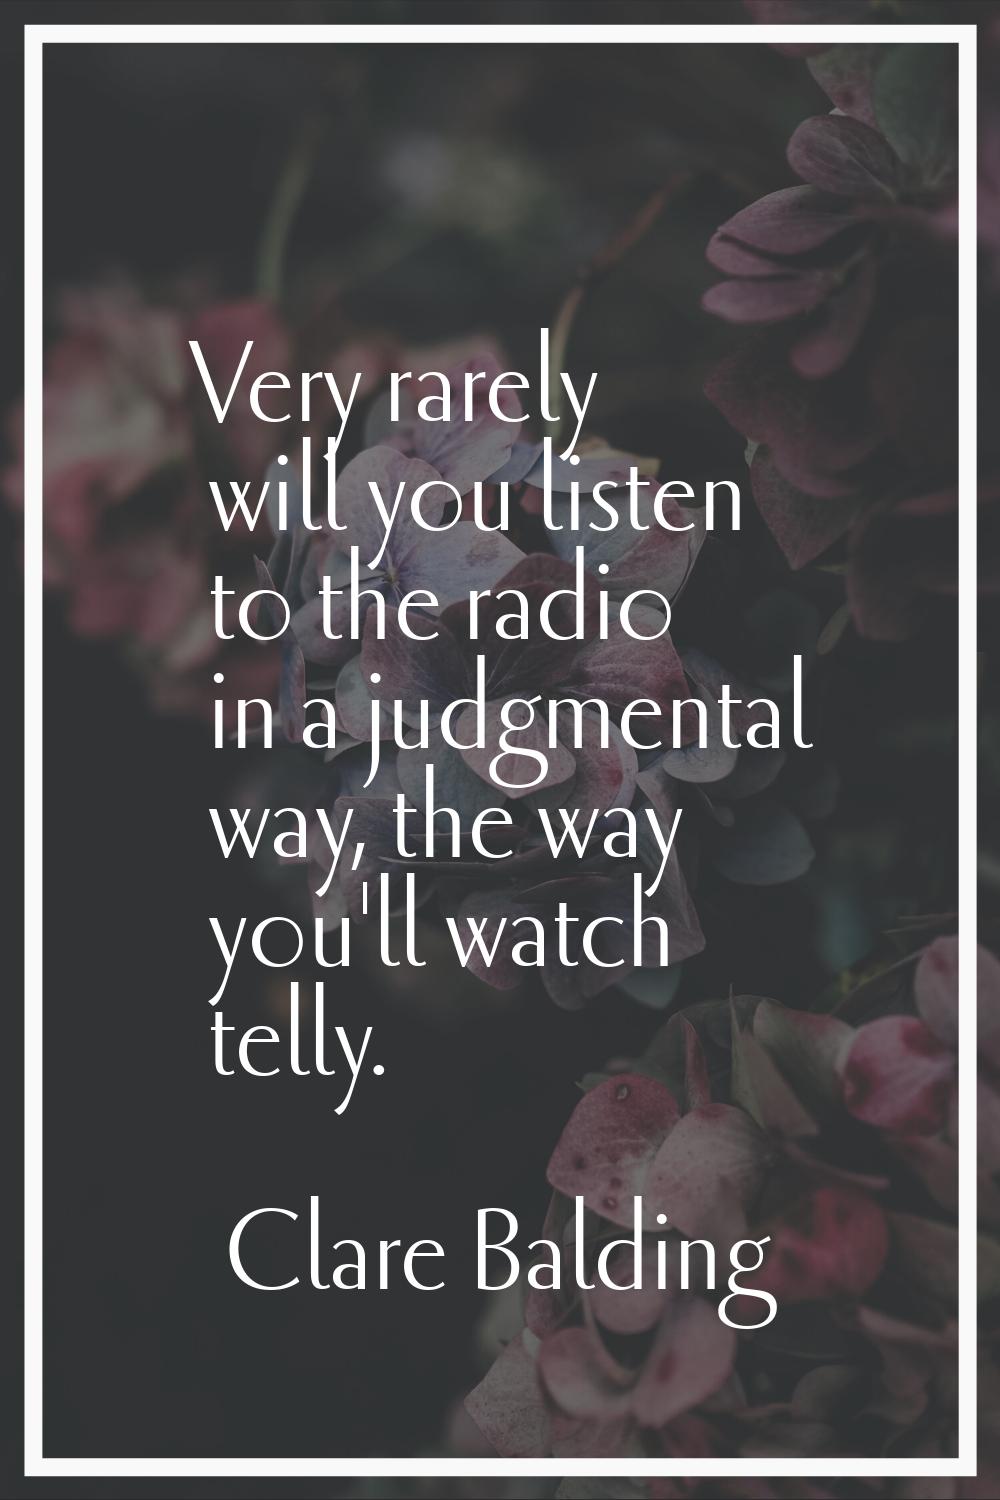 Very rarely will you listen to the radio in a judgmental way, the way you'll watch telly.